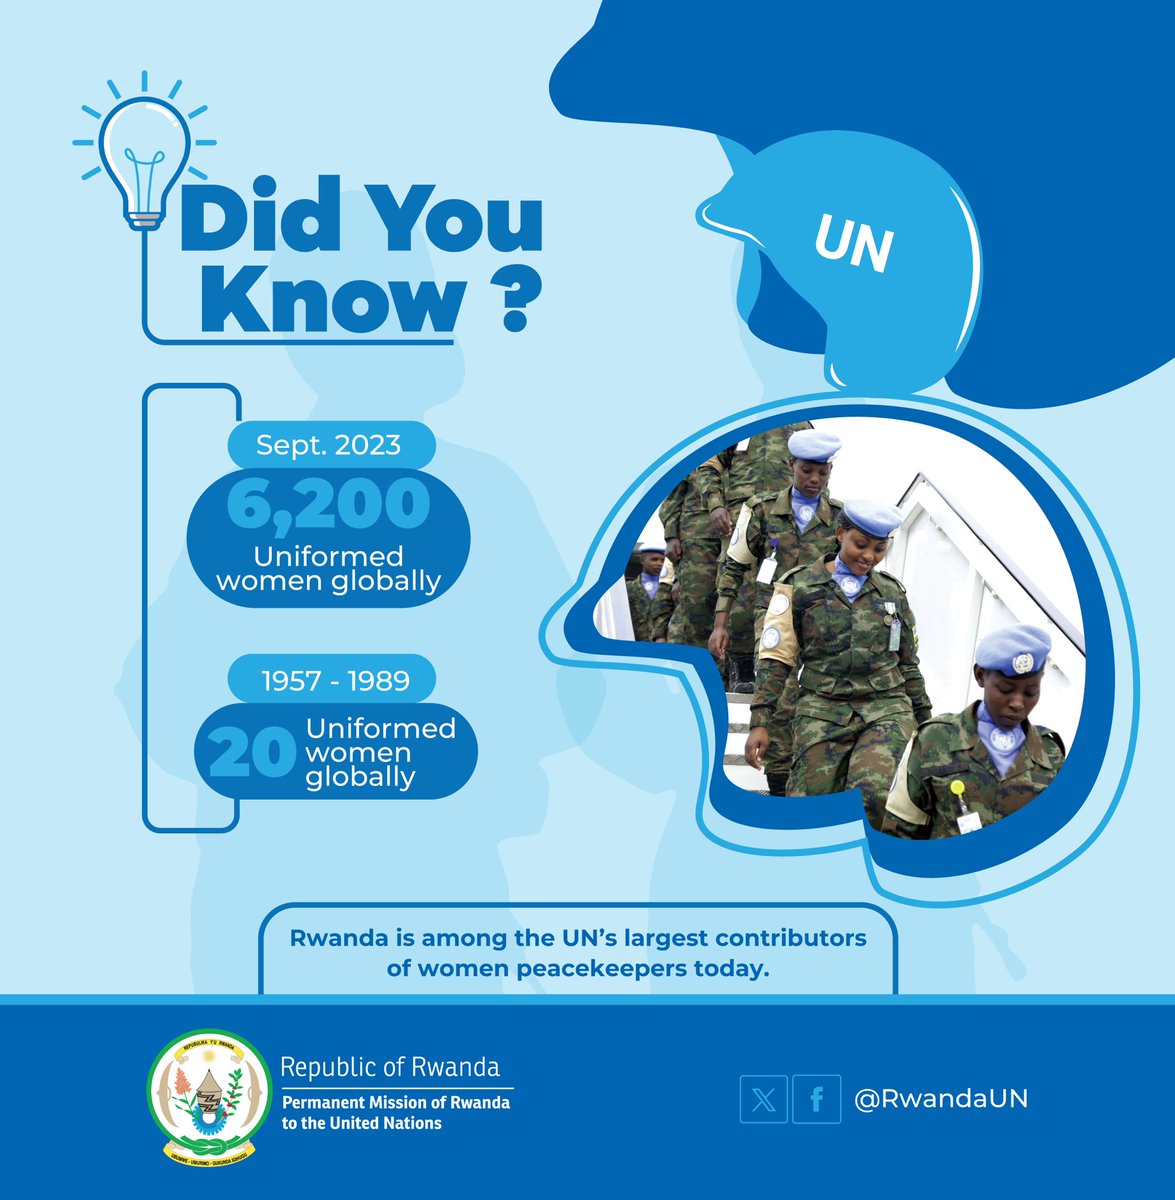 Between 1957-1989, only 20 women served in U.N peacekeeping missions globally. 

Today, there are more than 6,200 women in peacekeeping missions with Rwanda topping charts as Rwandan uniformed women serve in South Sudan (UNMISS) as well as the Central African Republic (MINUSCA)